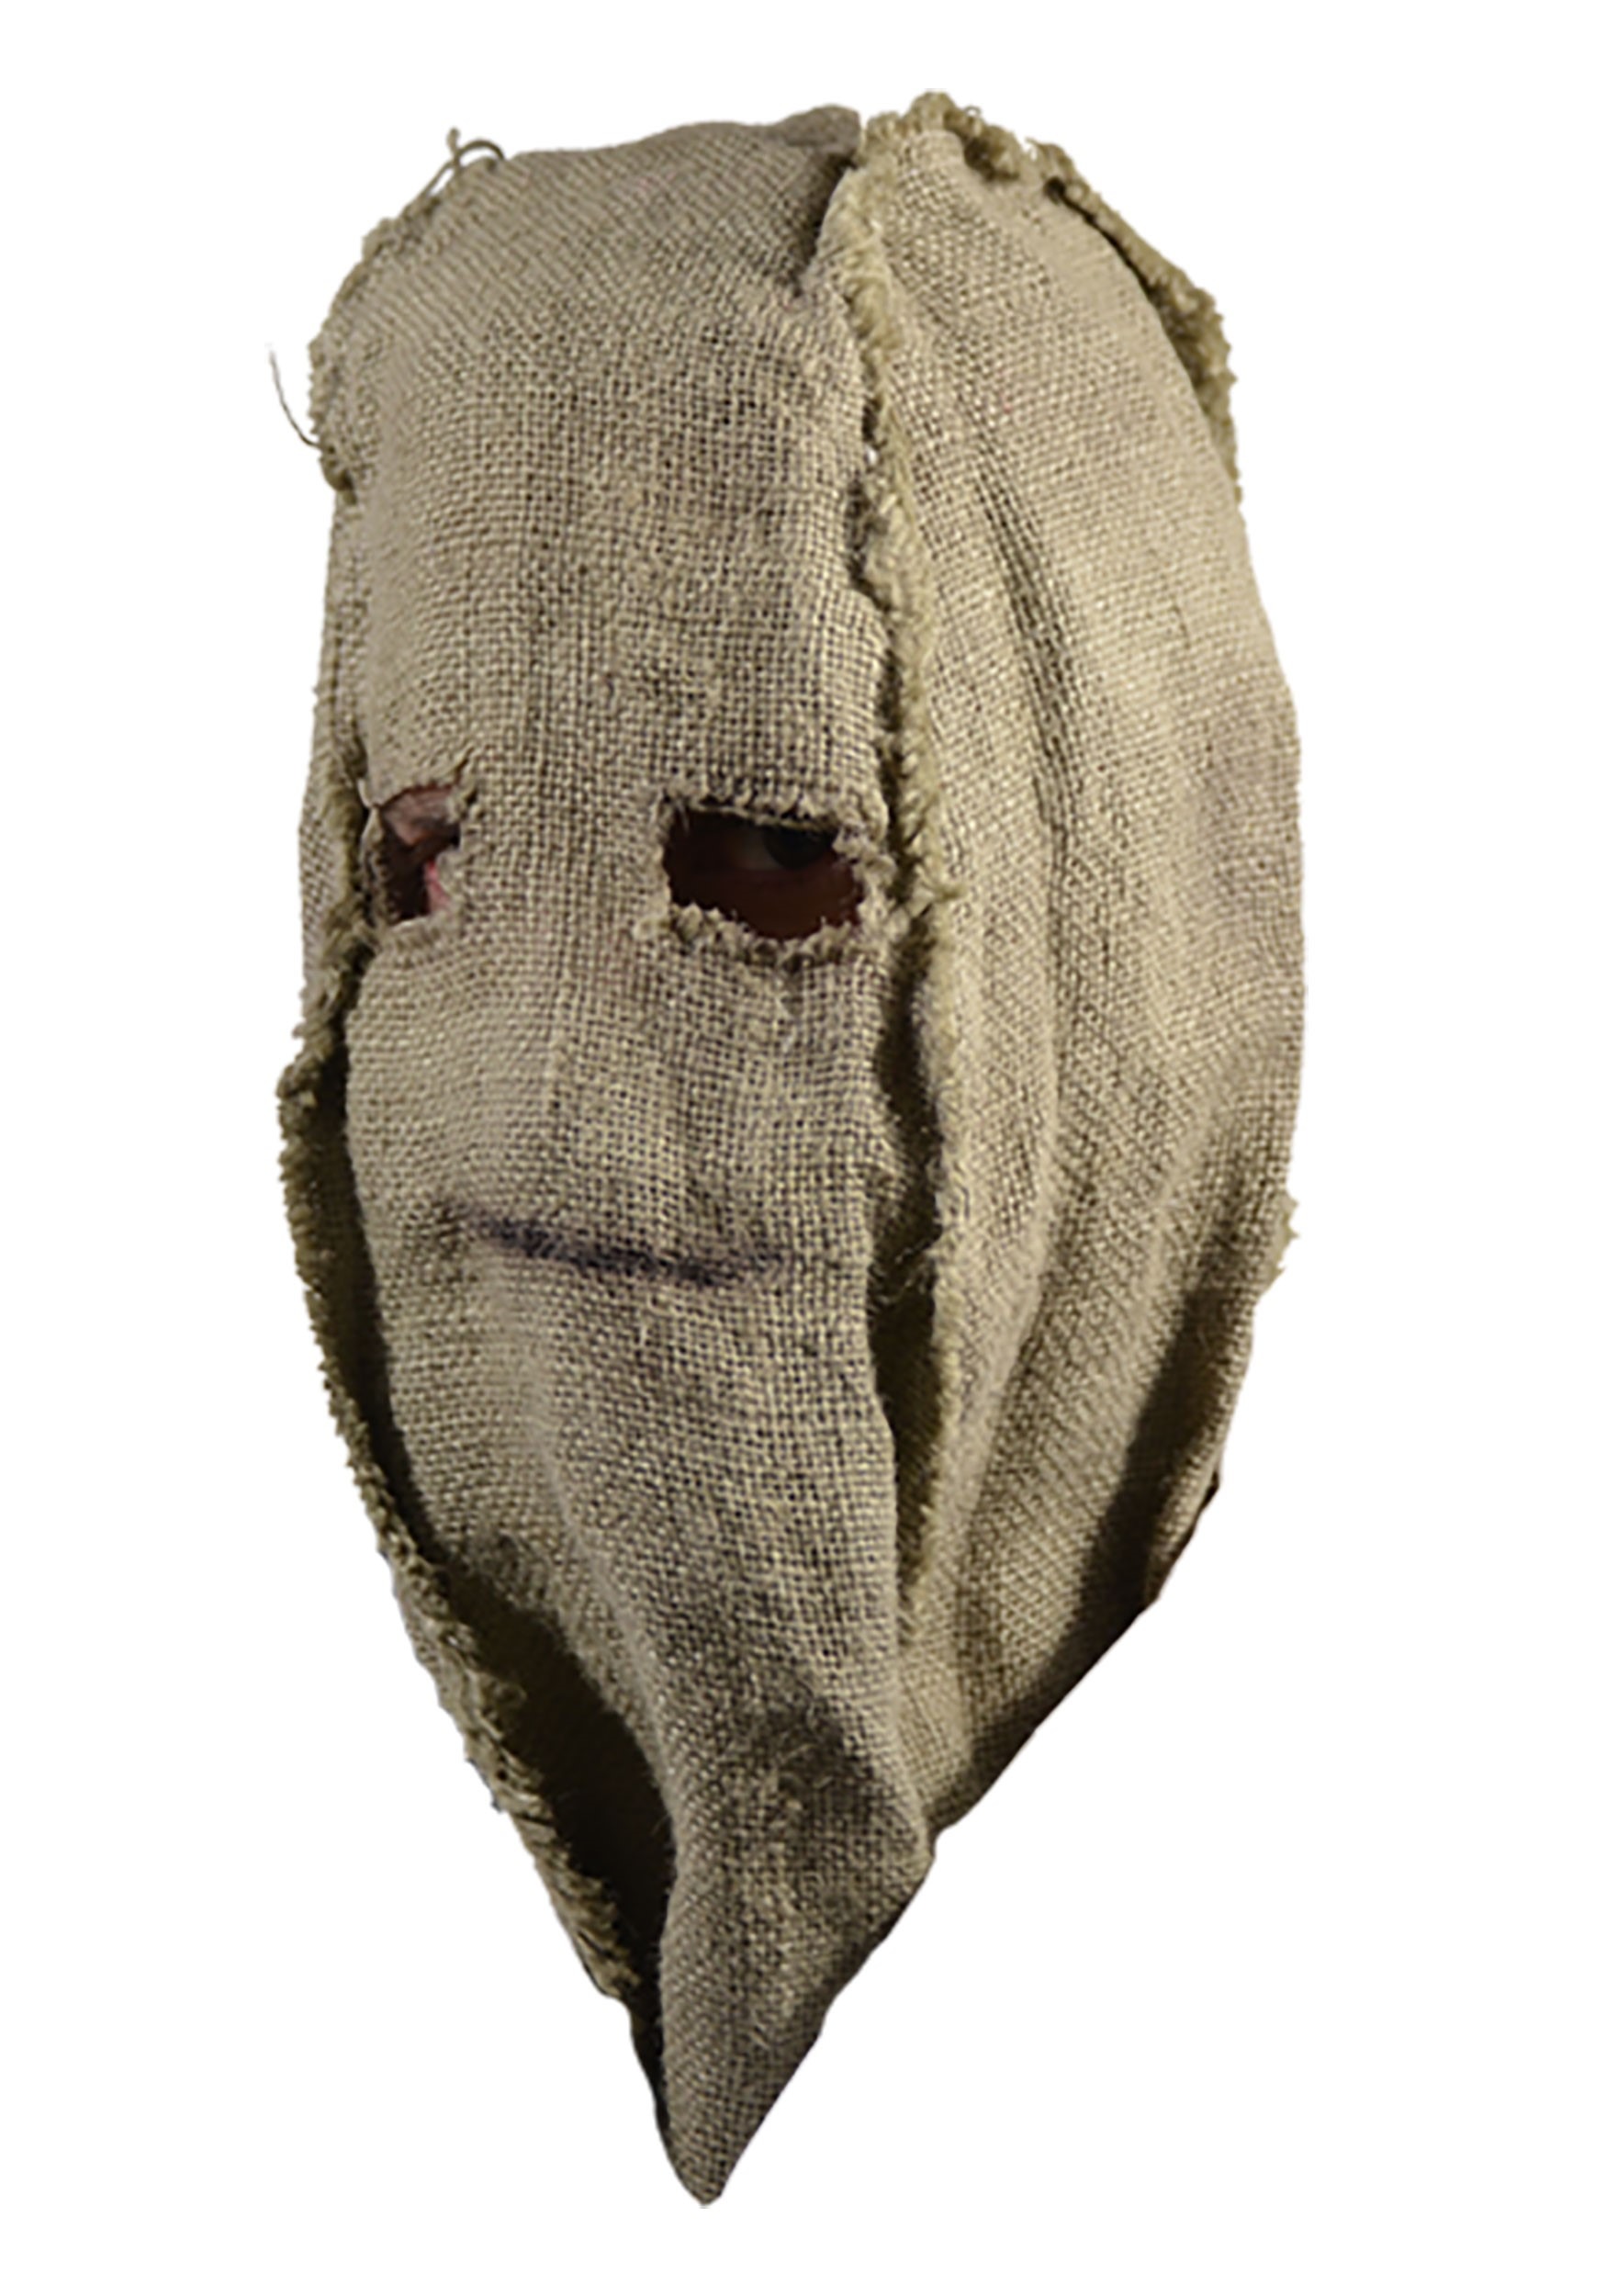 The Strangers Man in the Mask Burlap